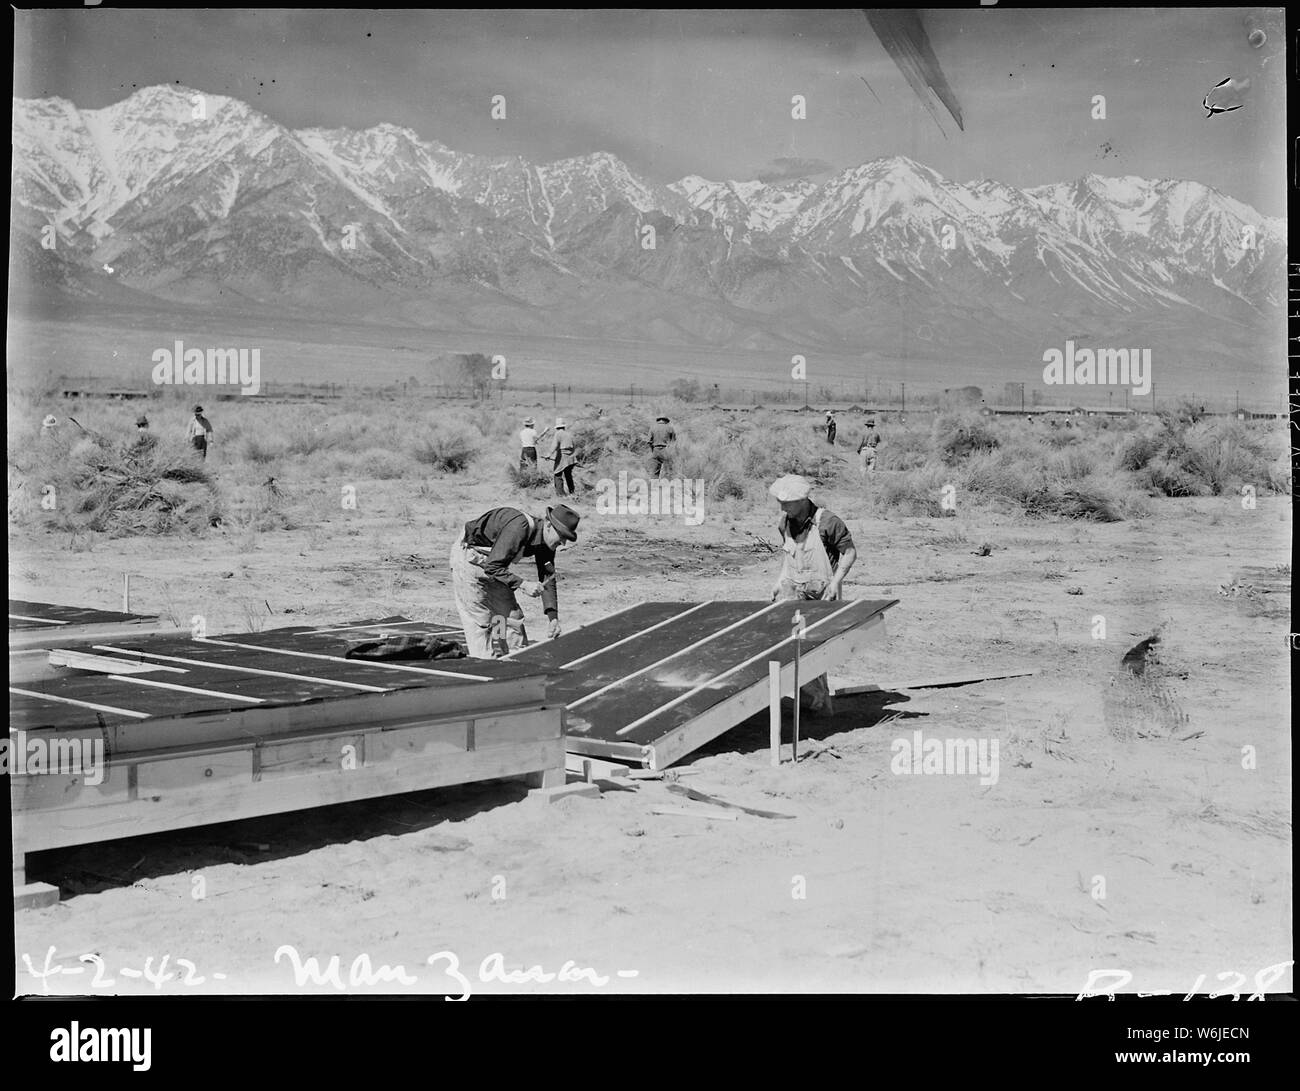 Manzanar Relocation Center, Manzanar, California. Construction begins at Manzanar, now a War Reloca . . .; Scope and content:  The full caption for this photograph reads: Manzanar Relocation Center, Manzanar, California. Construction begins at Manzanar, now a War Relocation Authority center for evacuees of Japanese ancestry, in Owens Valley, flanked by the High Sierras and Mount Whitney, loftiest peak in the United States. Stock Photo